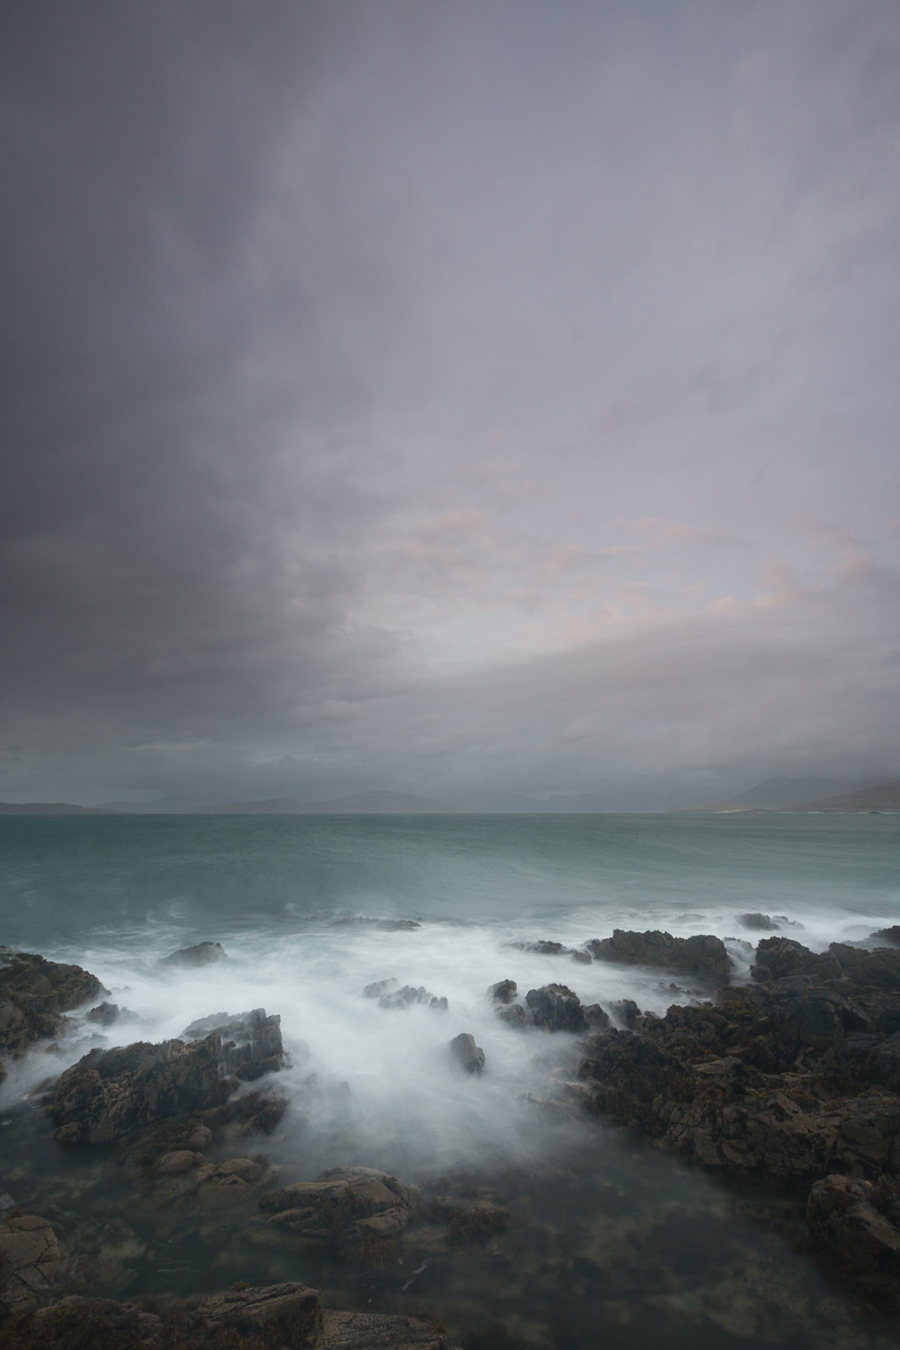 Moody grey clouds hover over churning turquoise waters. Mist-like waves crash against rugged rocks, blurring into a haze at the shore. The remote landscape exudes a serene yet powerful atmosphere. a group of clouds in the sky